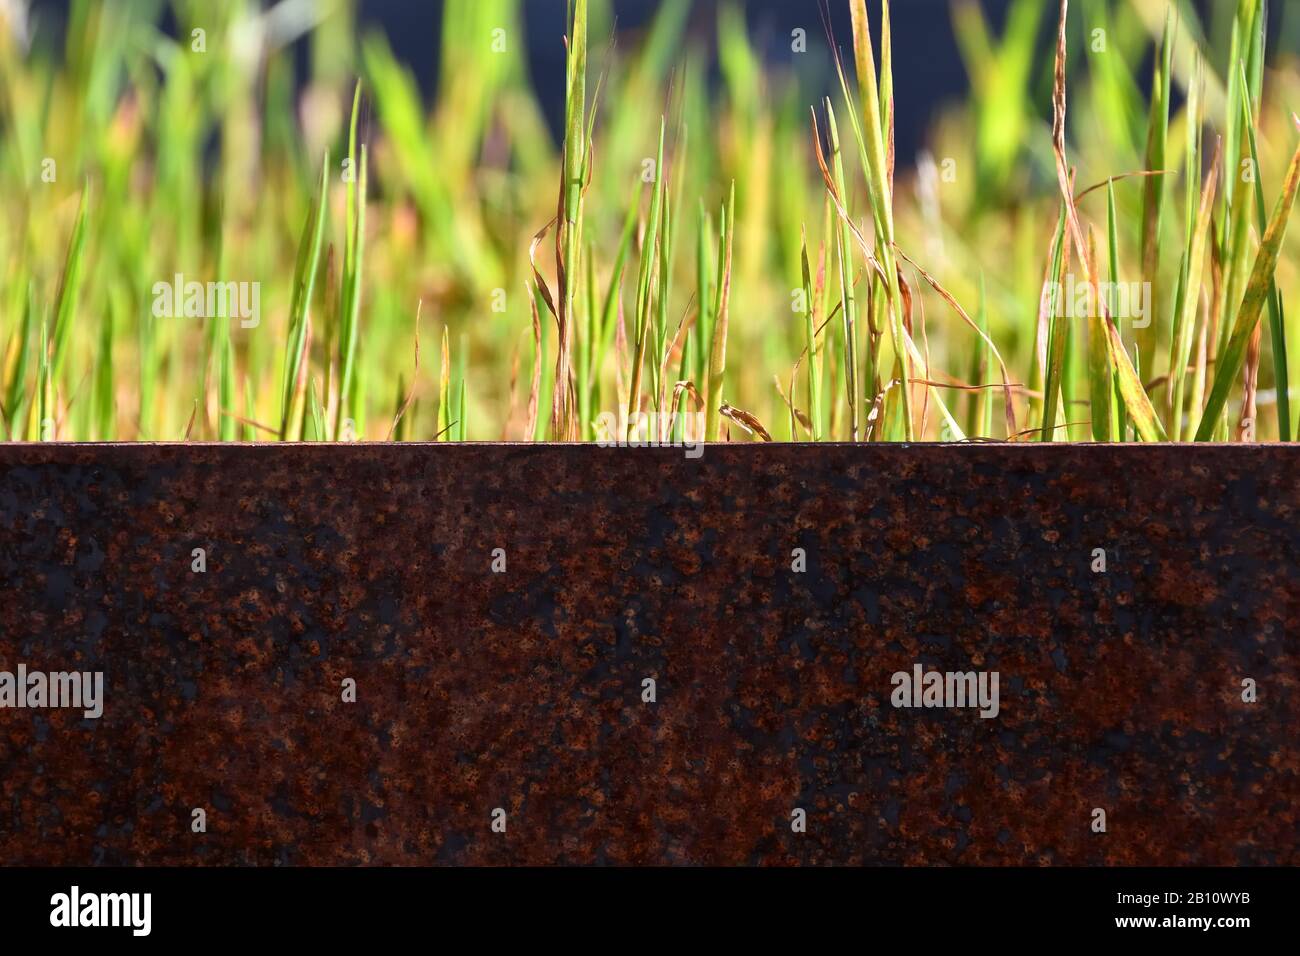 Detail of rusty metal planter with sunlit green grass Stock Photo